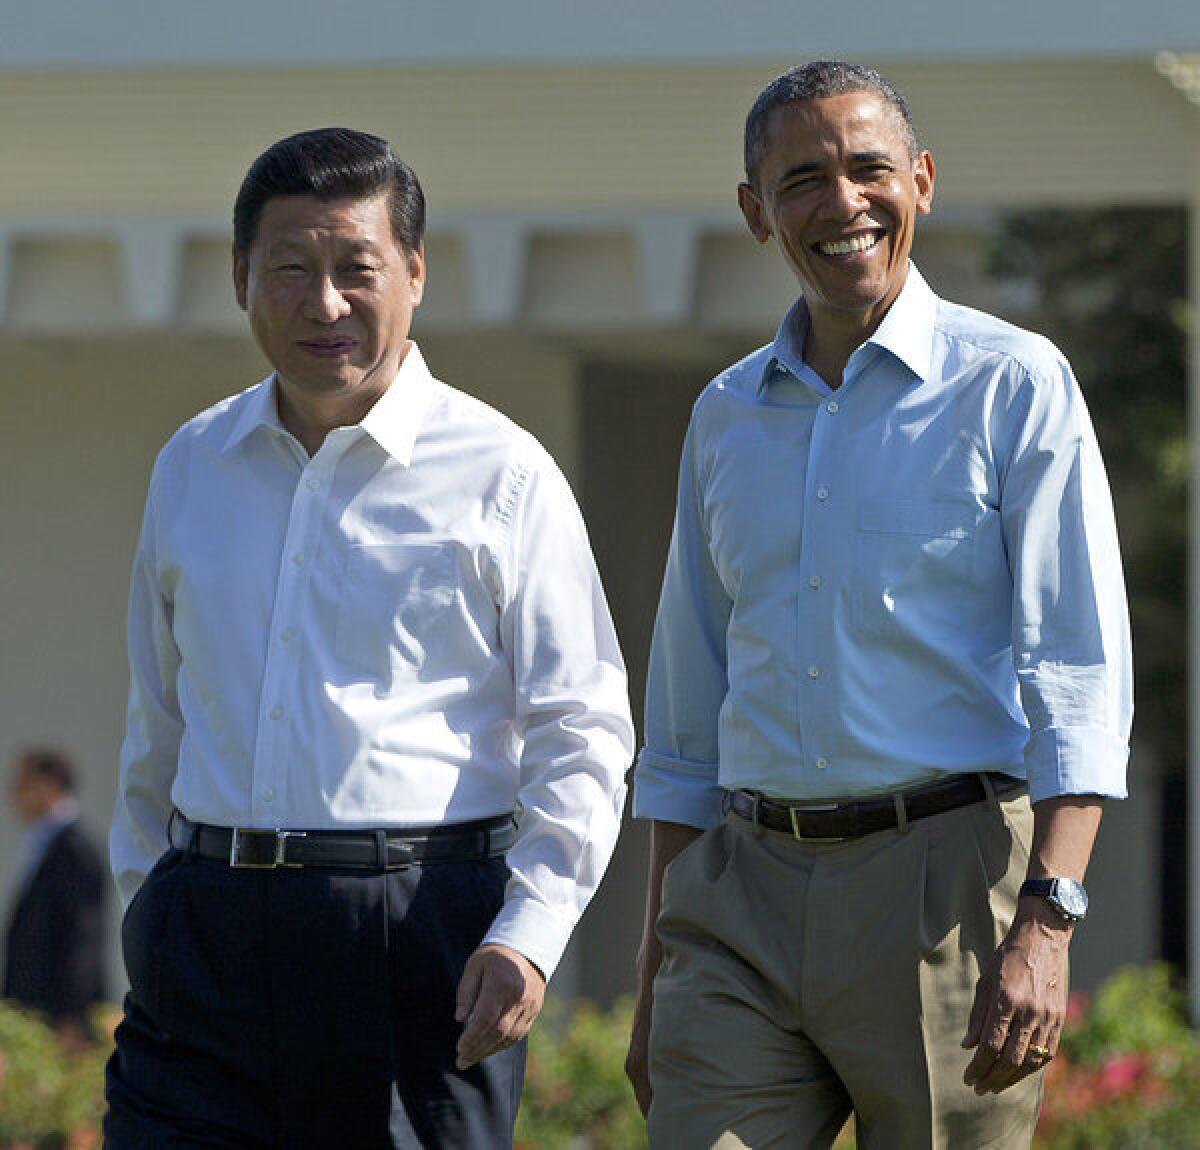 President Barack Obama is seen with Chinese President Xi Jinping at the Annenberg Retreat of the Sunnylands estate in Rancho Mirage, Calif.